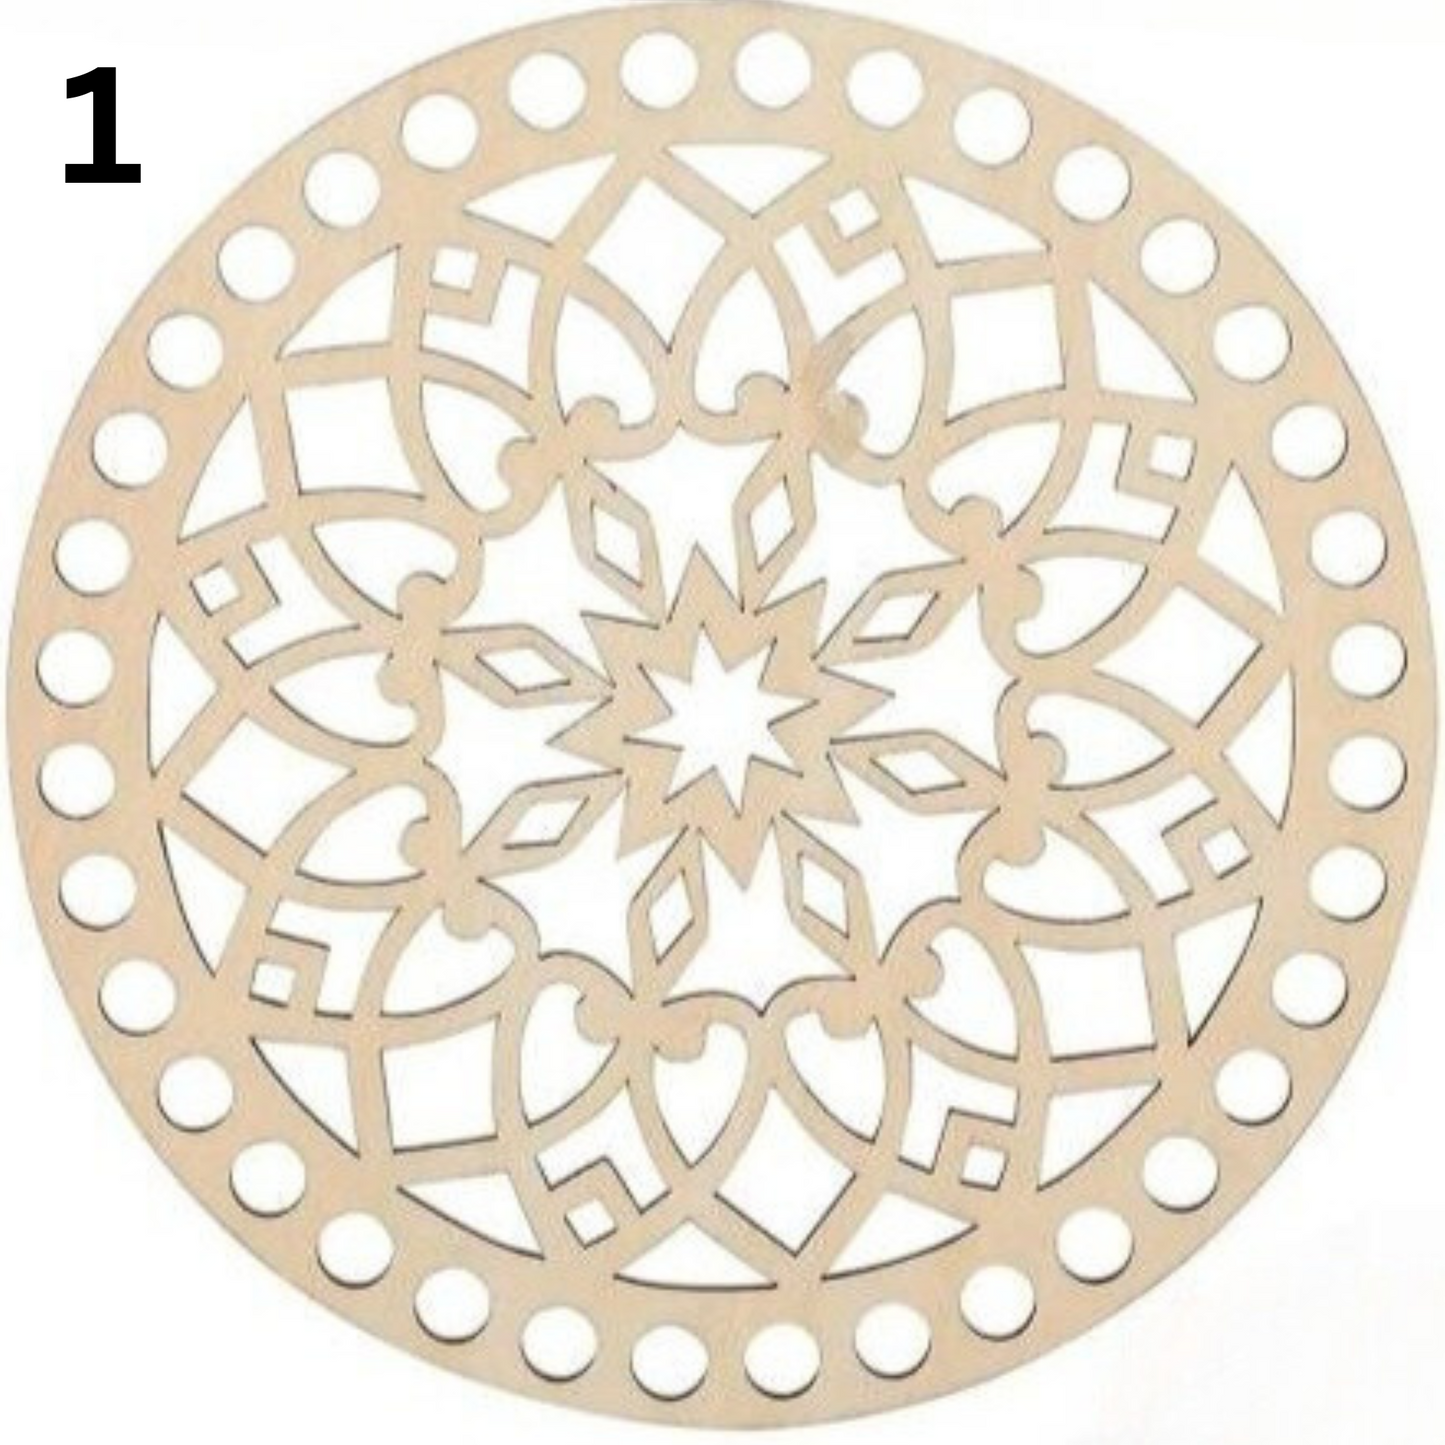 Round Wooden base lid with cut out designs for crochet basket